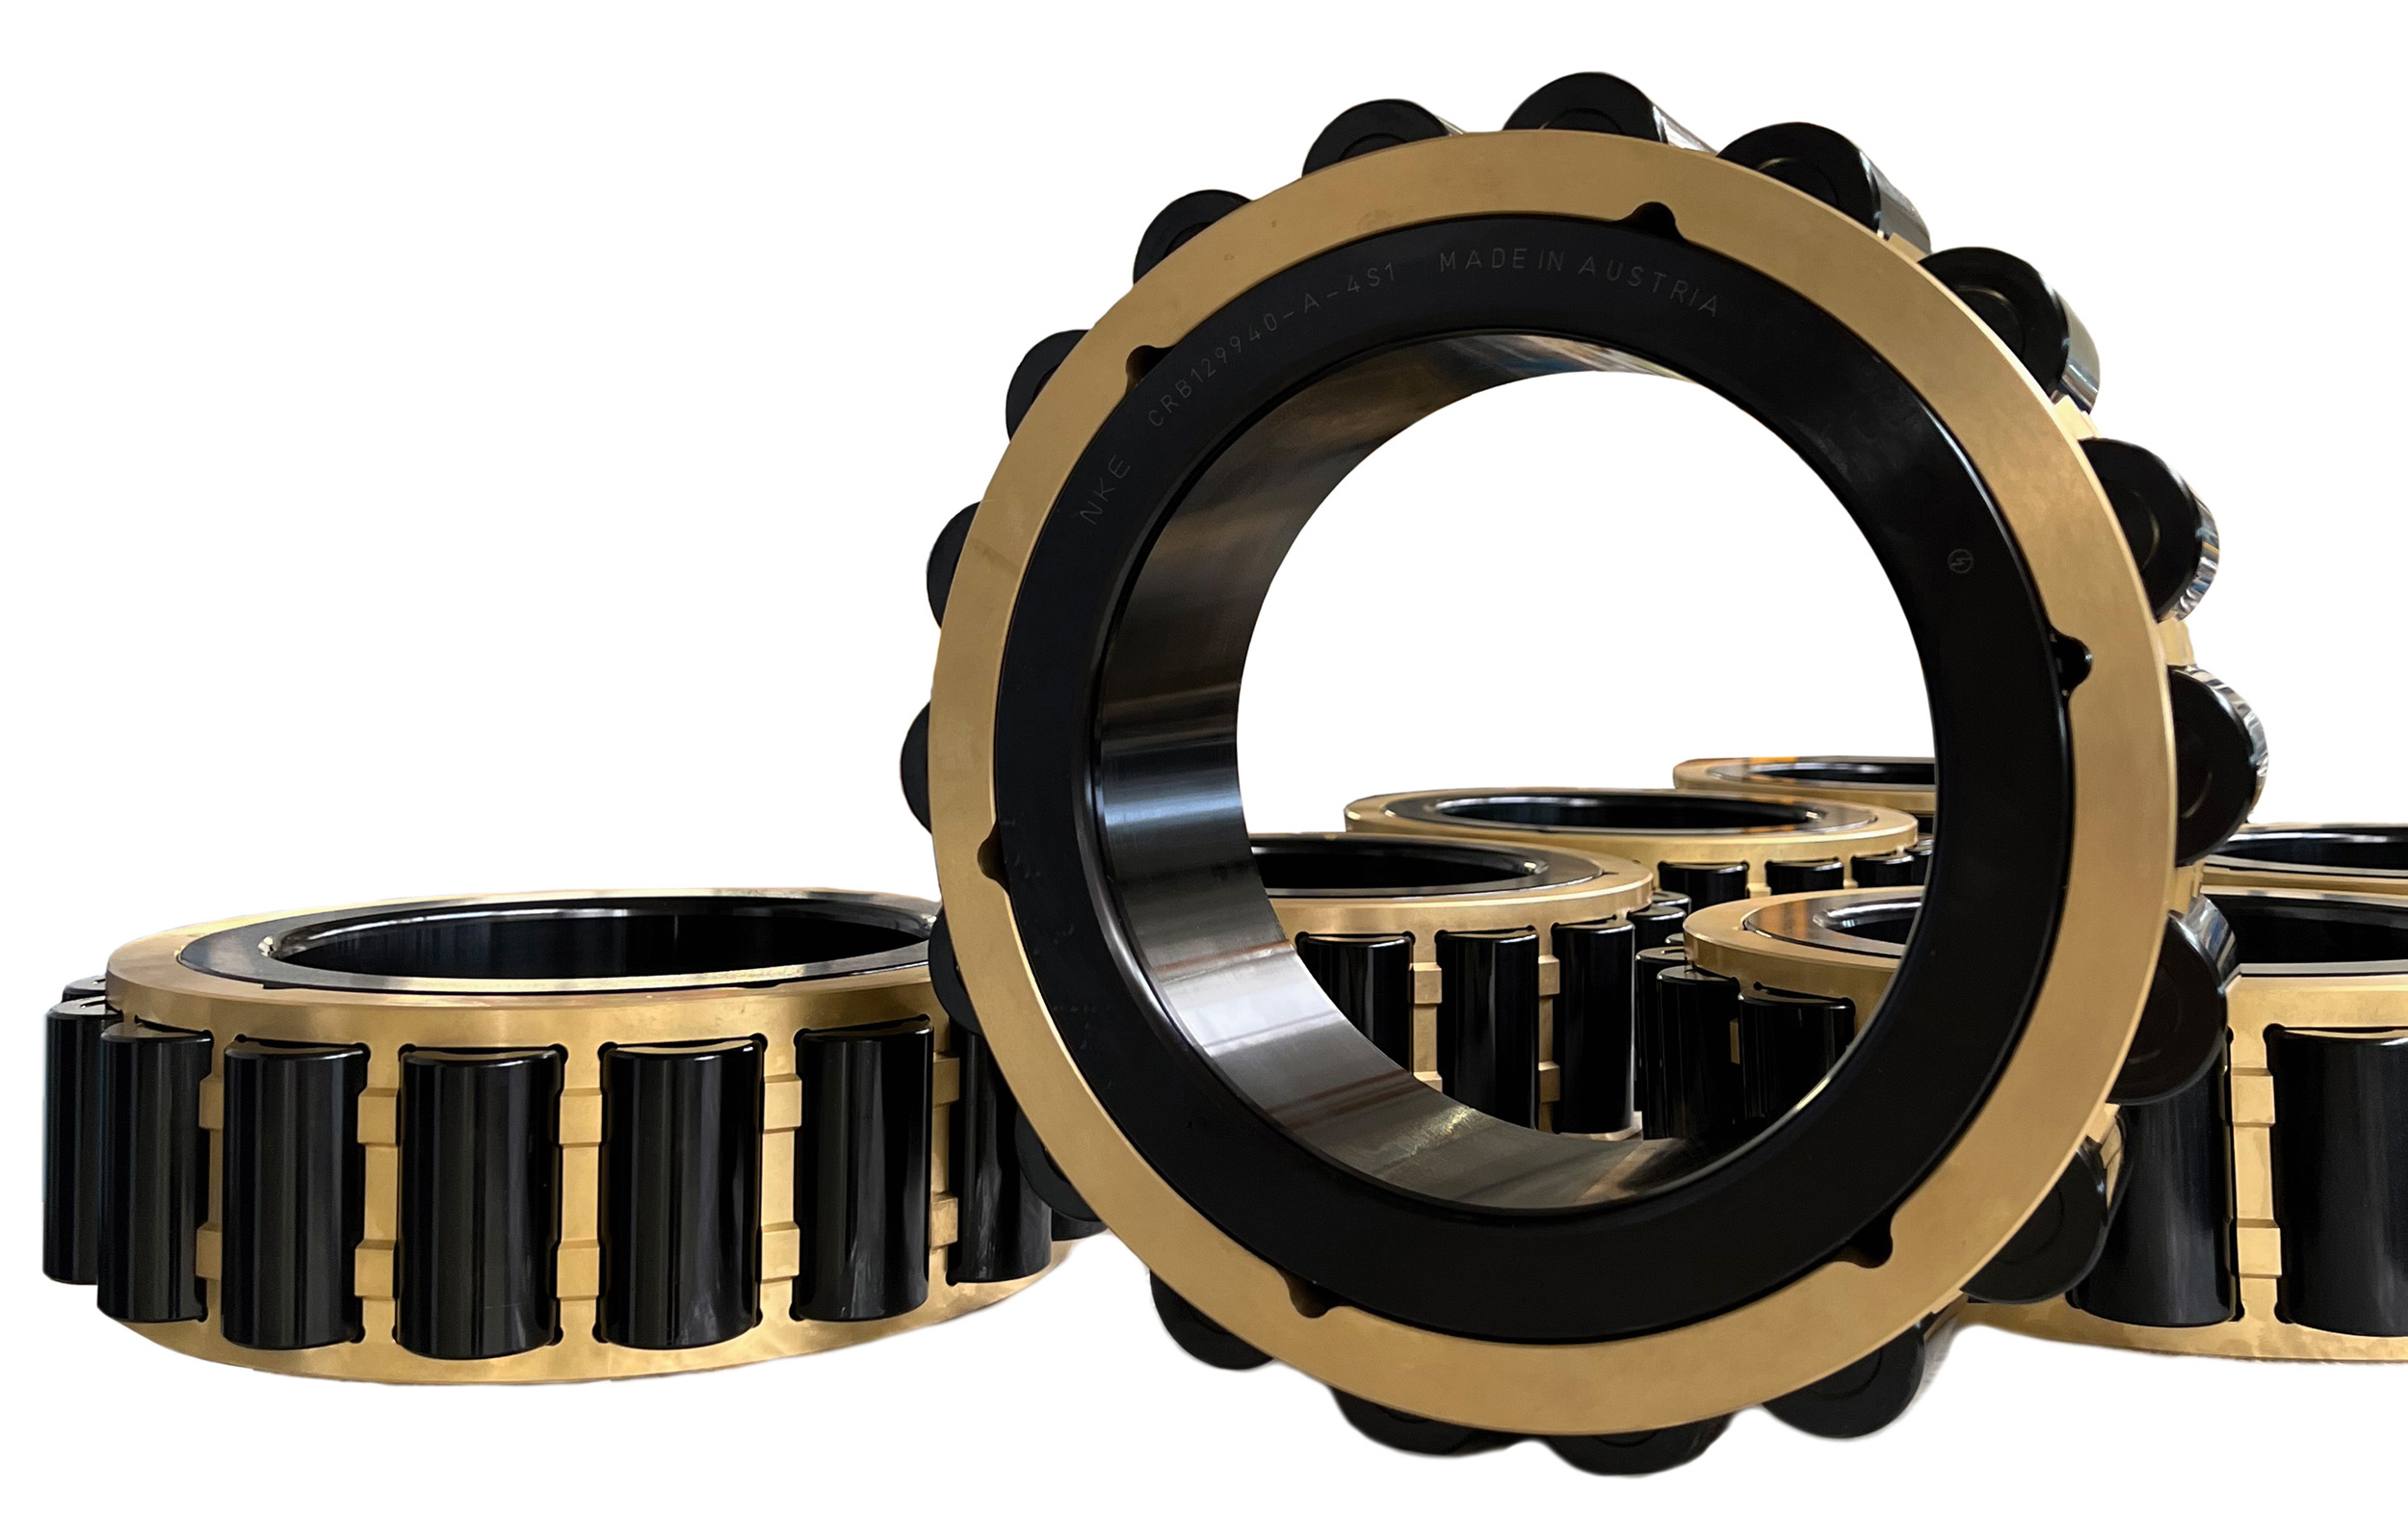 Cylindrical roller bearings with black oxide finish from NKE. Bearings used in wind turbine gearboxes are commonly coated with black oxide. This special treatment forms a protective layer on the functional surfaces of a bearing. Among other advantages, black oxide finished bearings offer improved run-in and wear and enhanced adhesive wear characteristics.